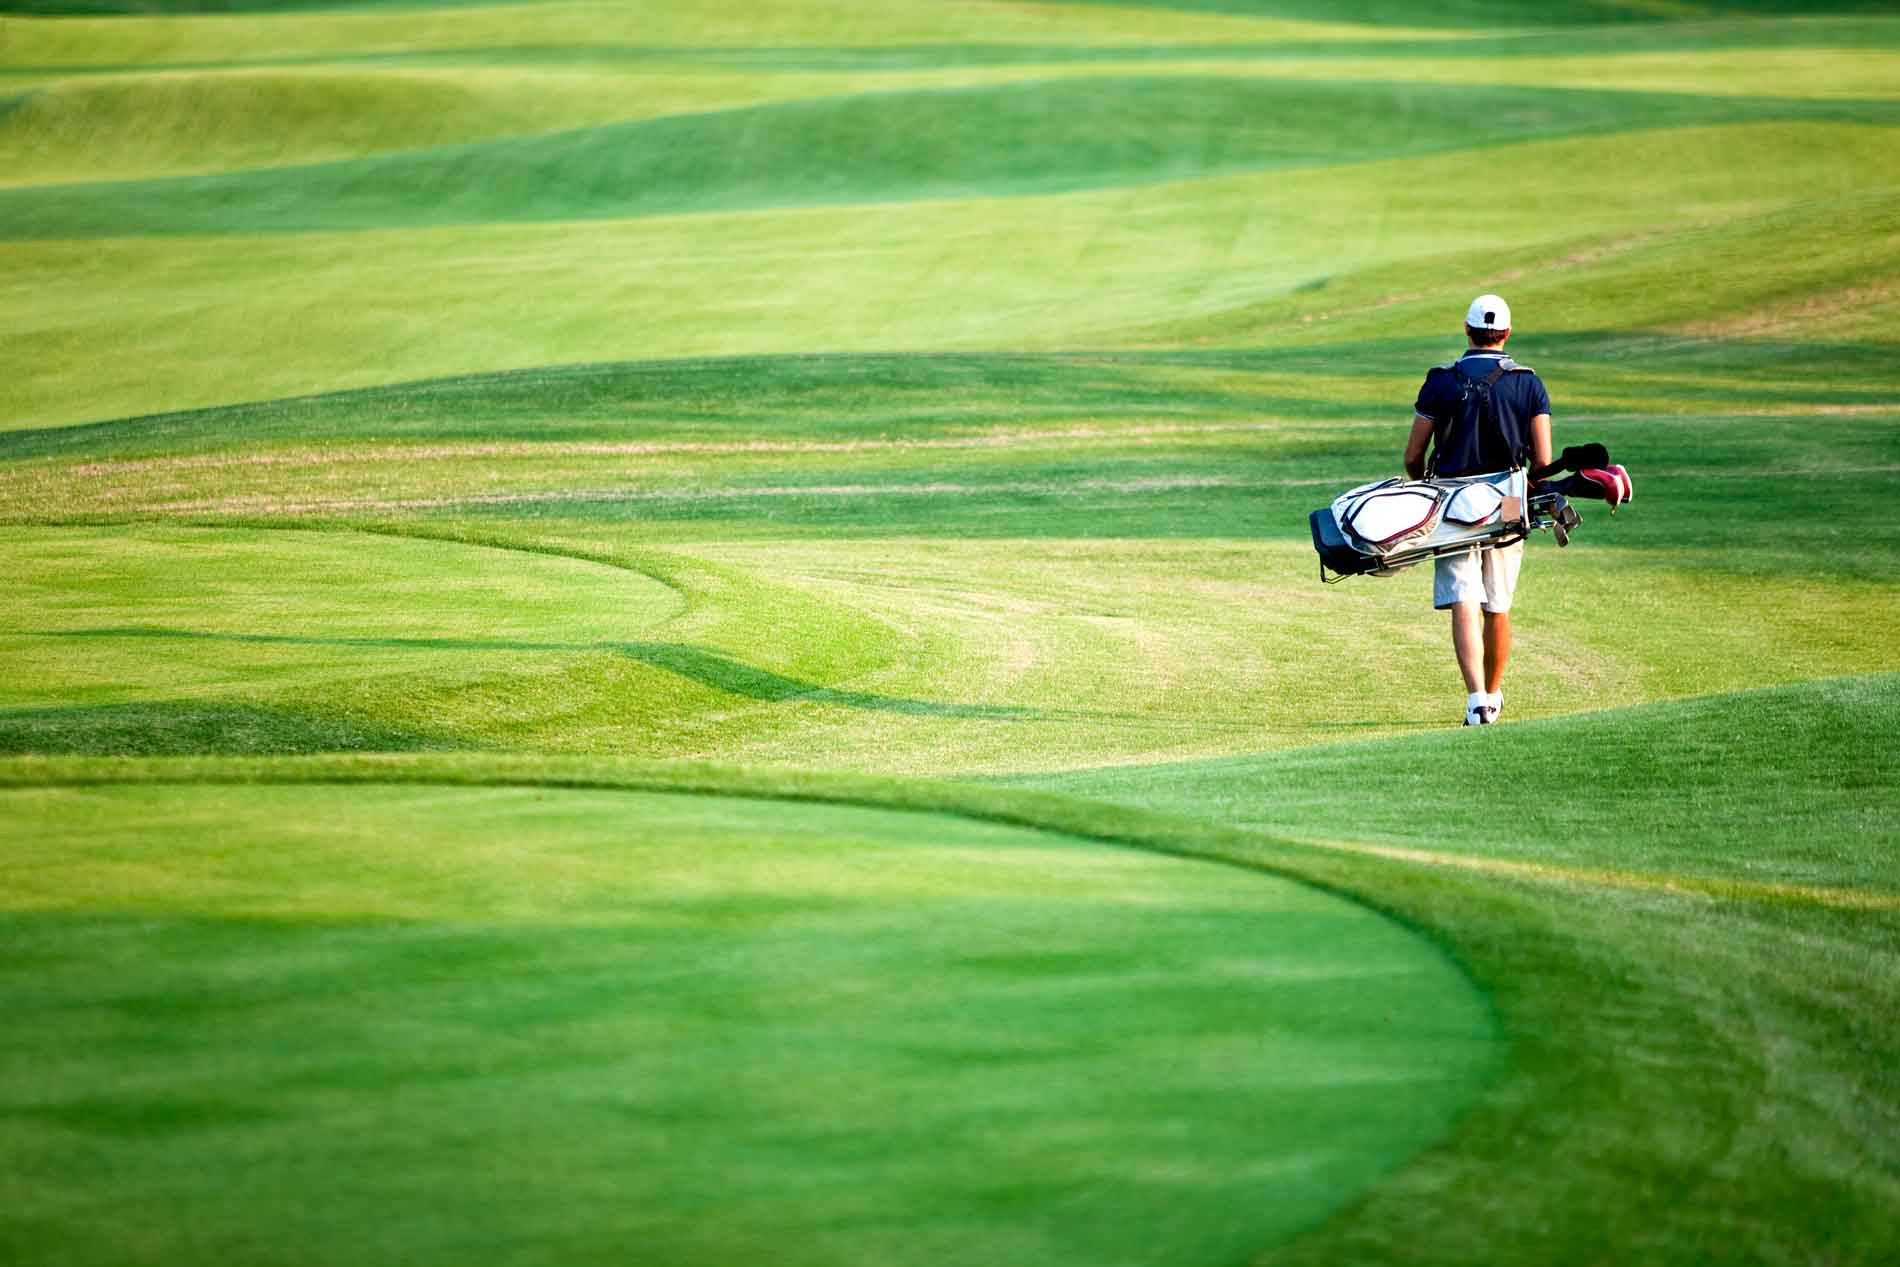 The Grass is Greener Where You Amend It - Humic Land™ for Golf Course & Turf Maintenance